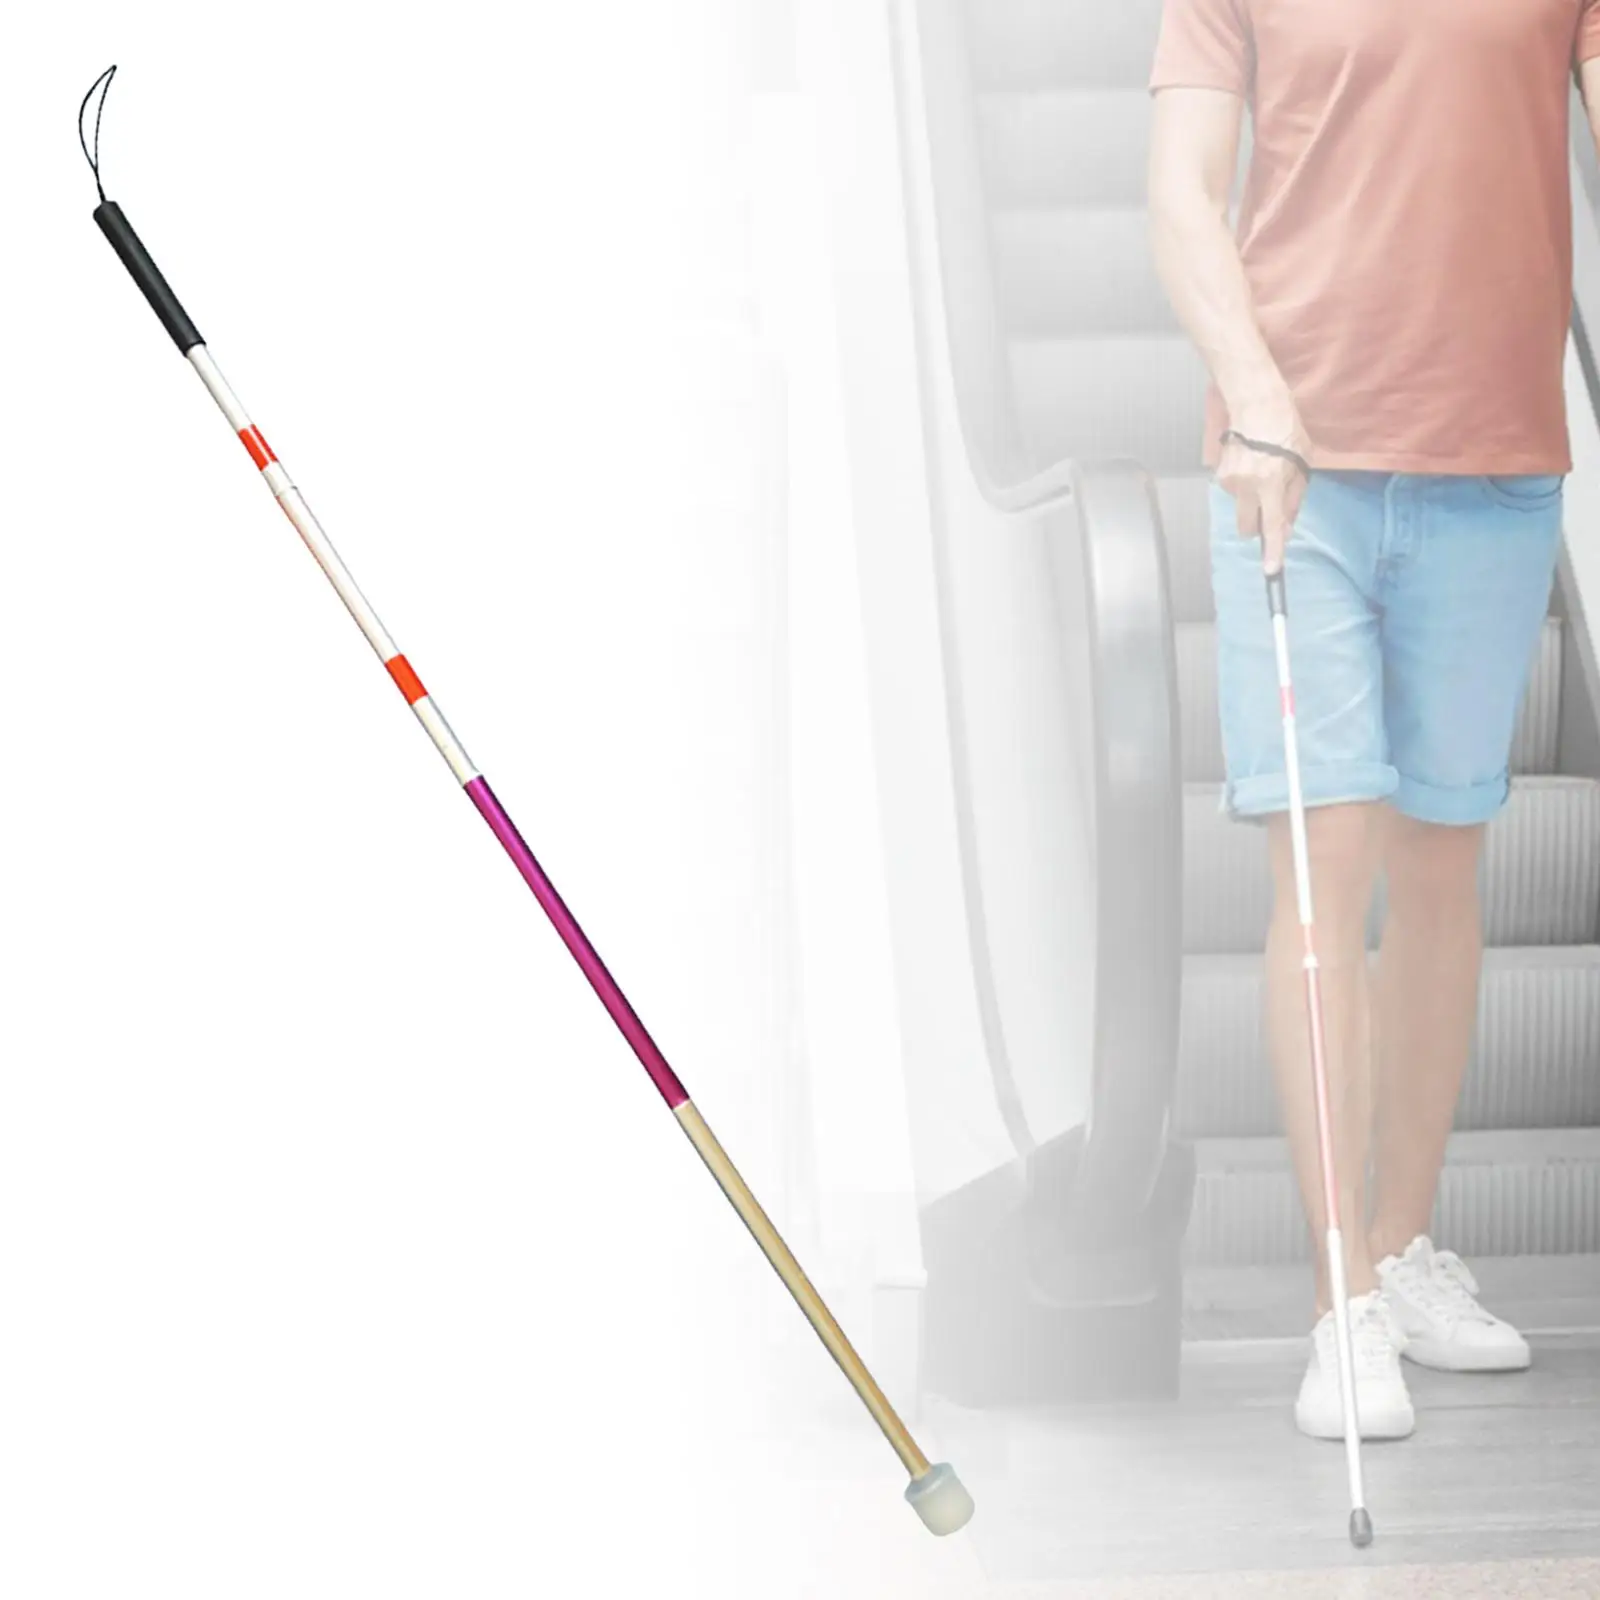 Folding Mobility Cane Guide Crutch Walking Cane with Wrist Strap Collapsible Hand Walking Stick Blind Cane for Vision Impaired